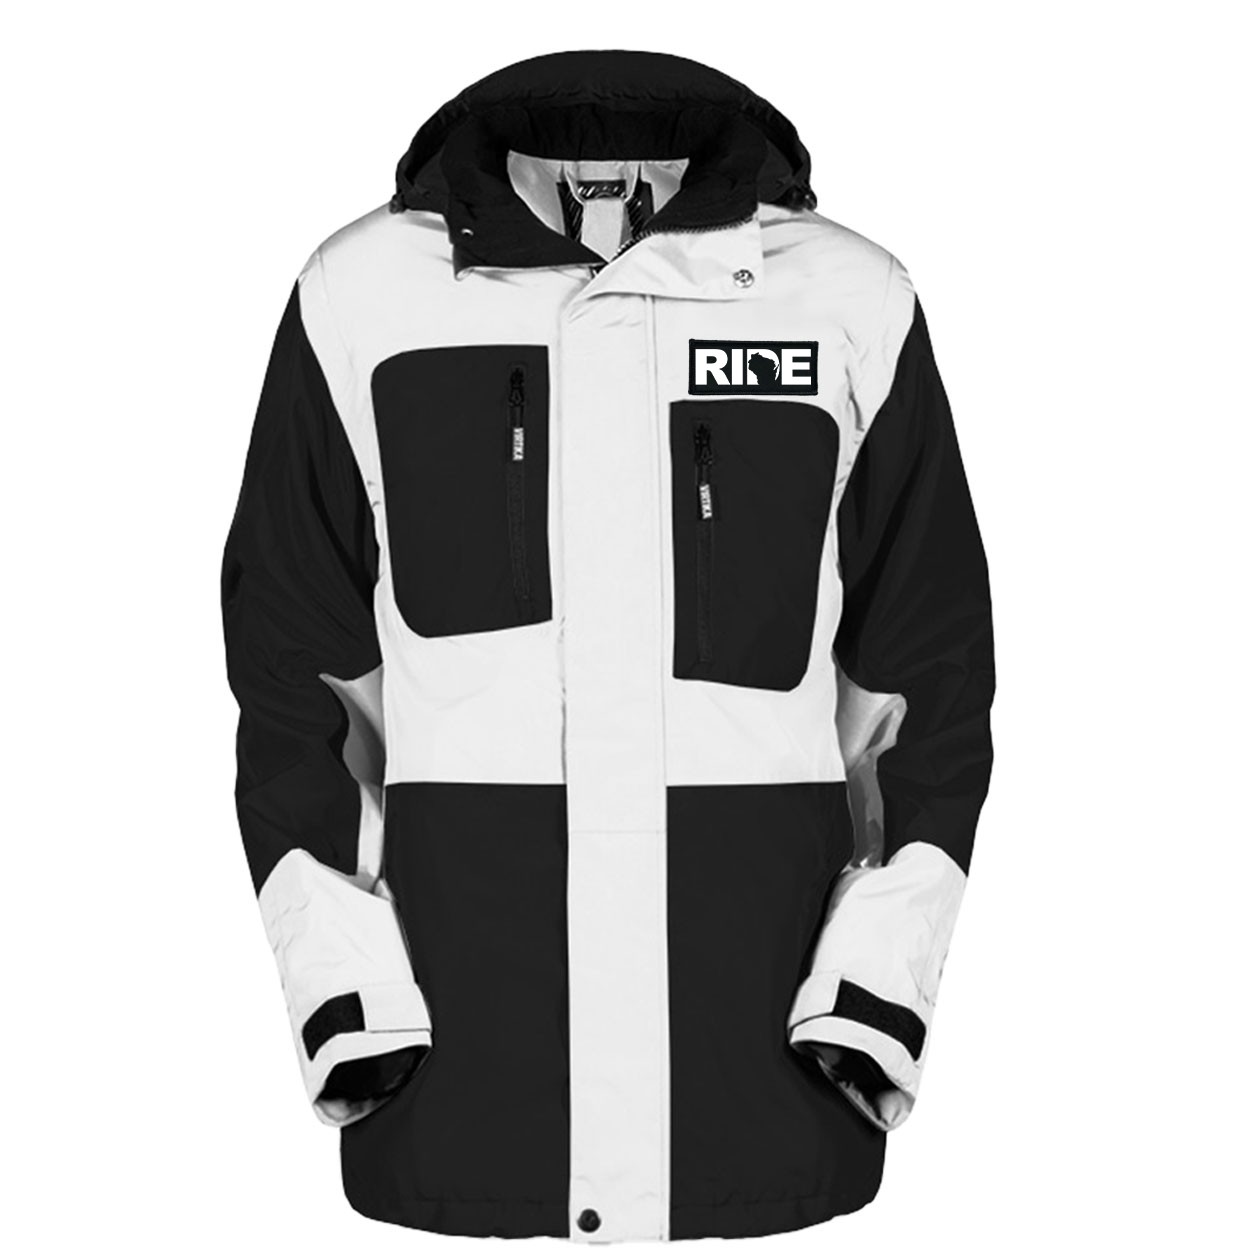 Ride Wisconsin Classic Woven Patch Pro Snowboard Jacket (Black/White)